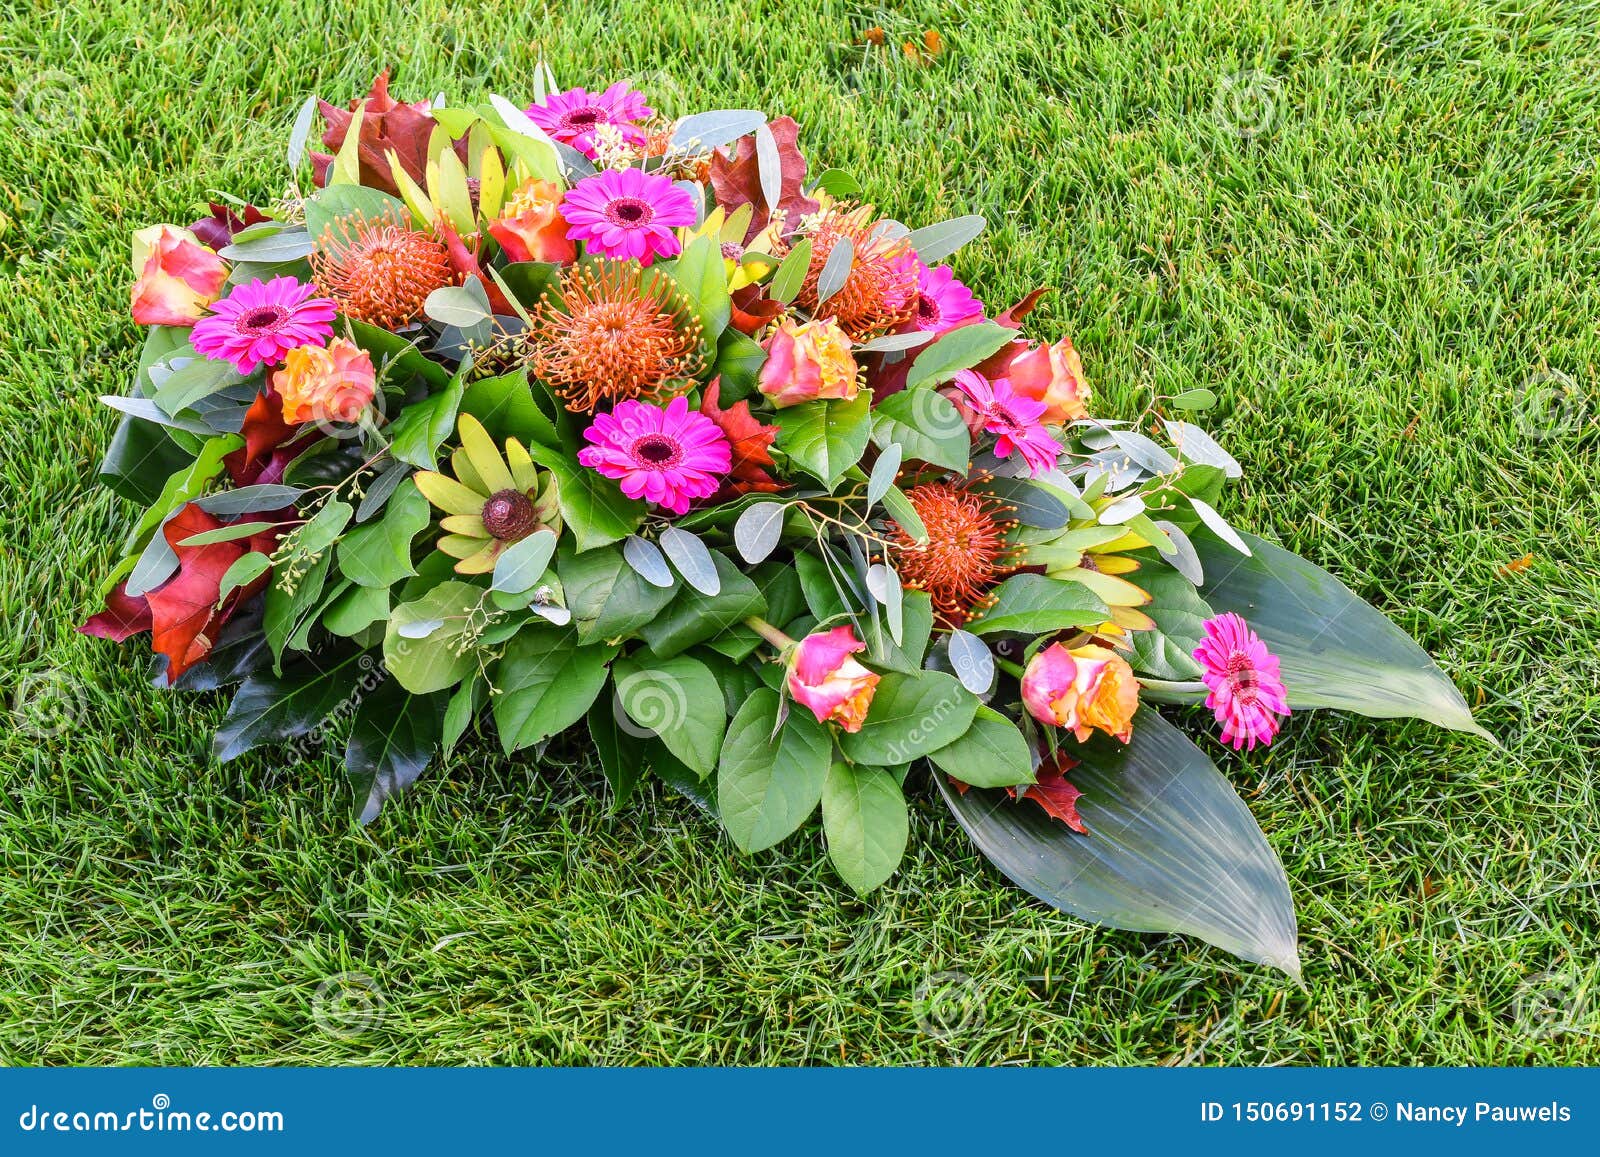 All Saints Day Flower Arrangements Flowers For Graveyard And Funeral Stock Photo Image Of Blossom Field 150691152